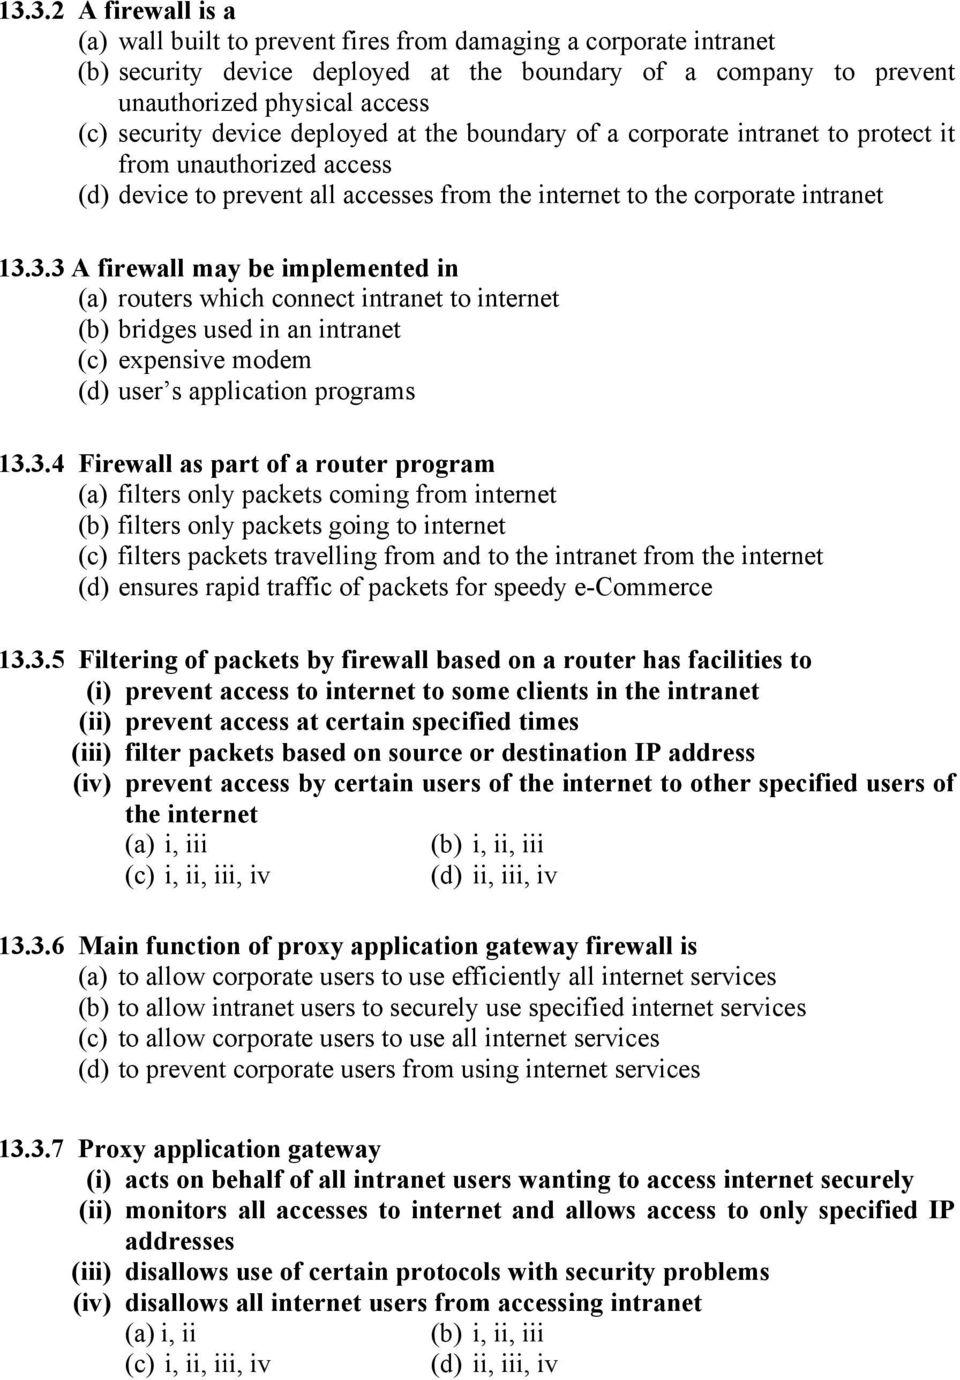 3.3 A firewall may be implemented in (a) routers which connect intranet to internet (b) bridges used in an intranet (c) expensive modem (d) user s application programs 13.3.4 Firewall as part of a